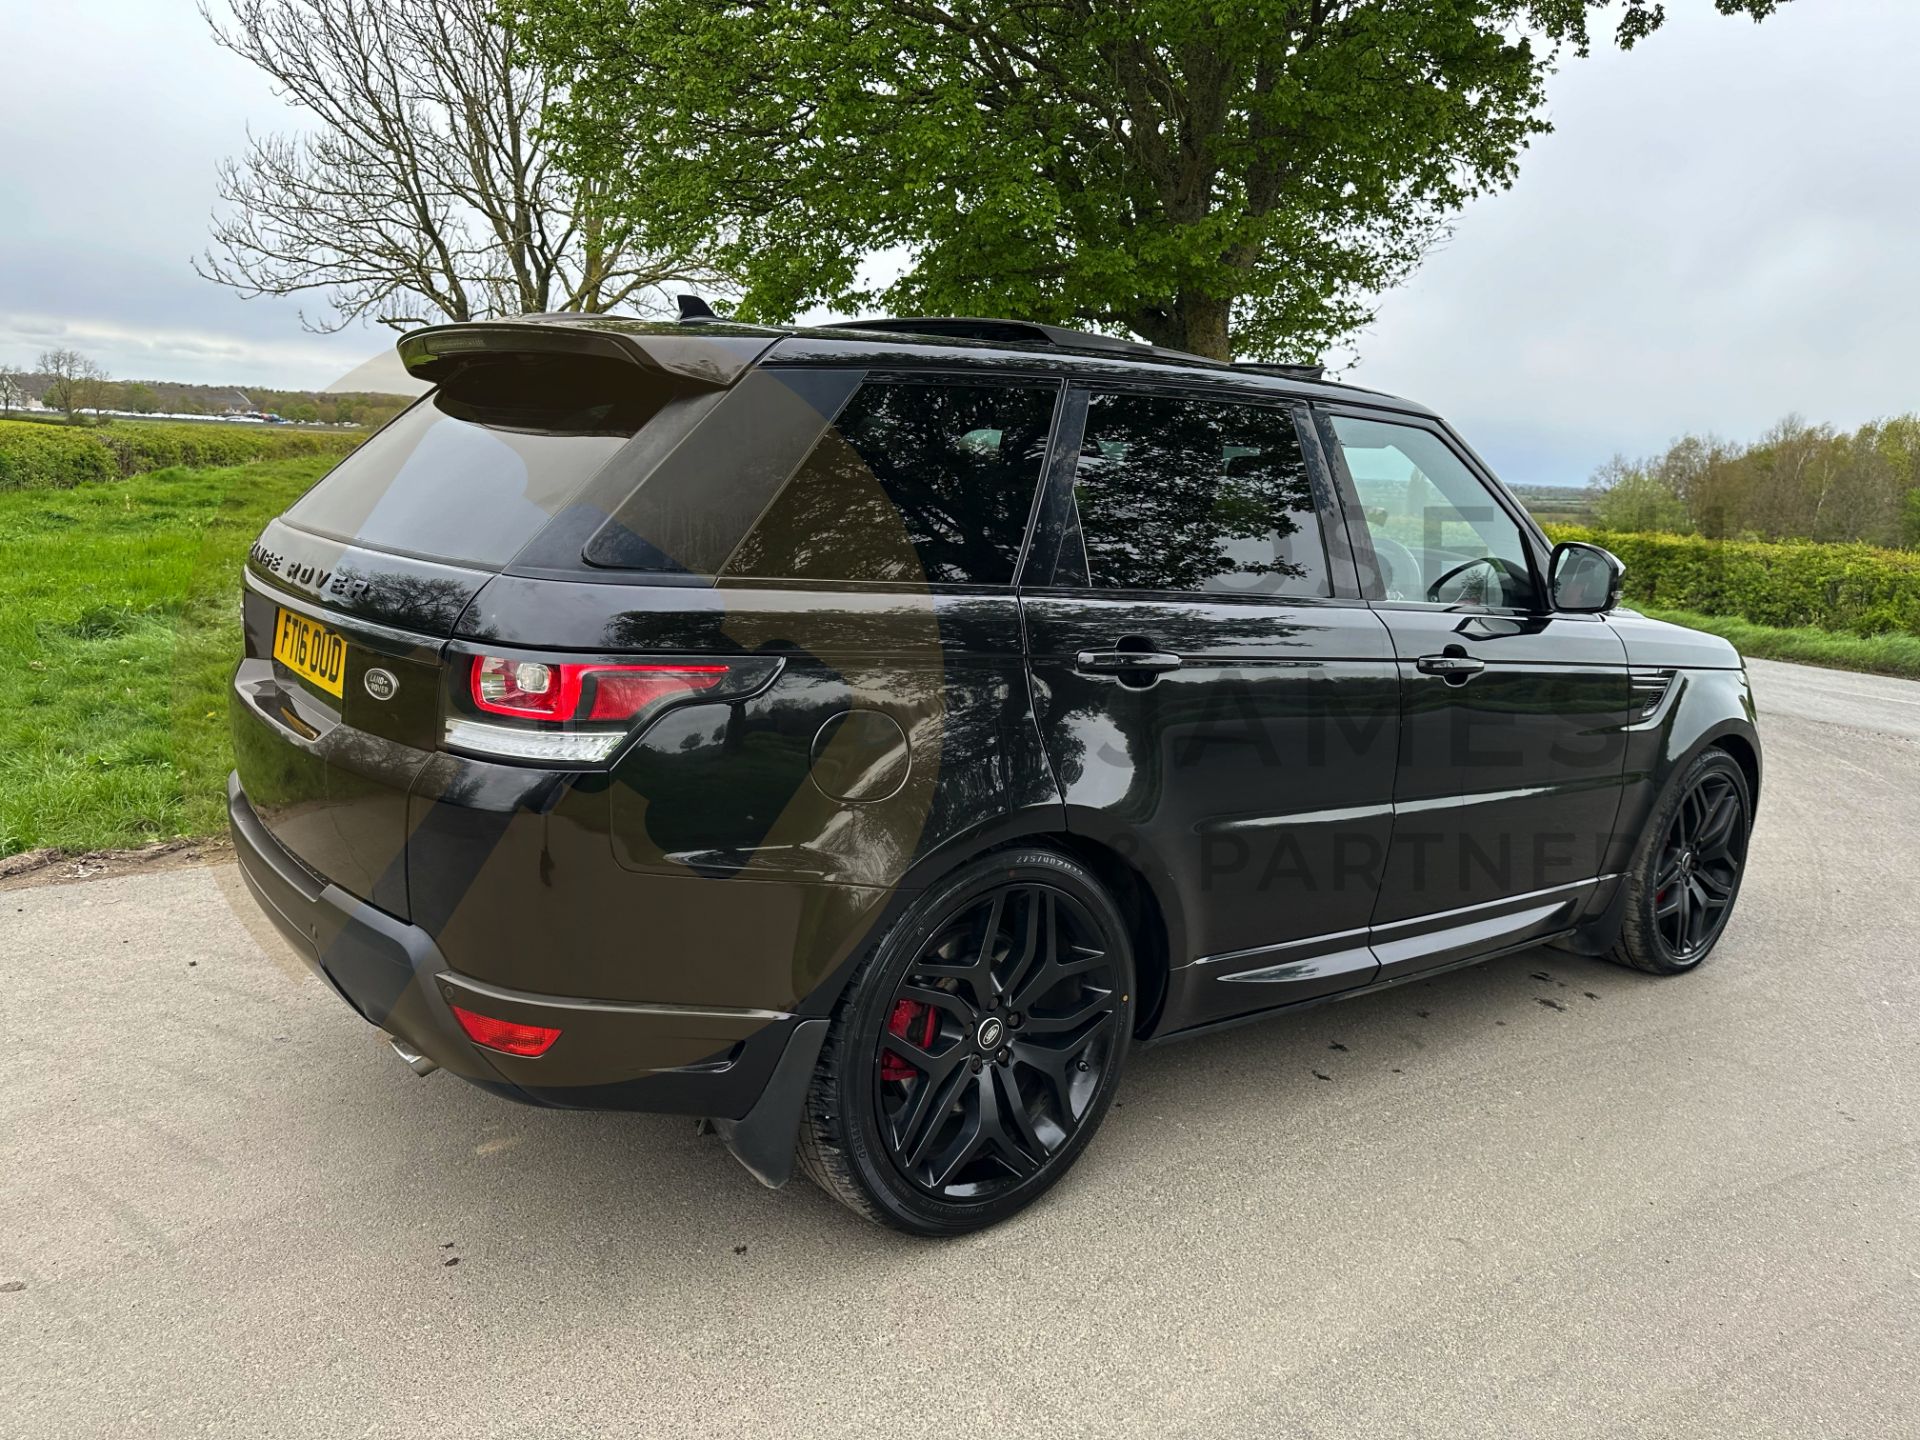 (ON SALE) RANGE ROVER SPORT *AUTOBIOGRAPHY DYNAMIC* SUV (2016 - EURO 6) 3.0 SDV6 - 8 SPEED AUTO - Image 13 of 61